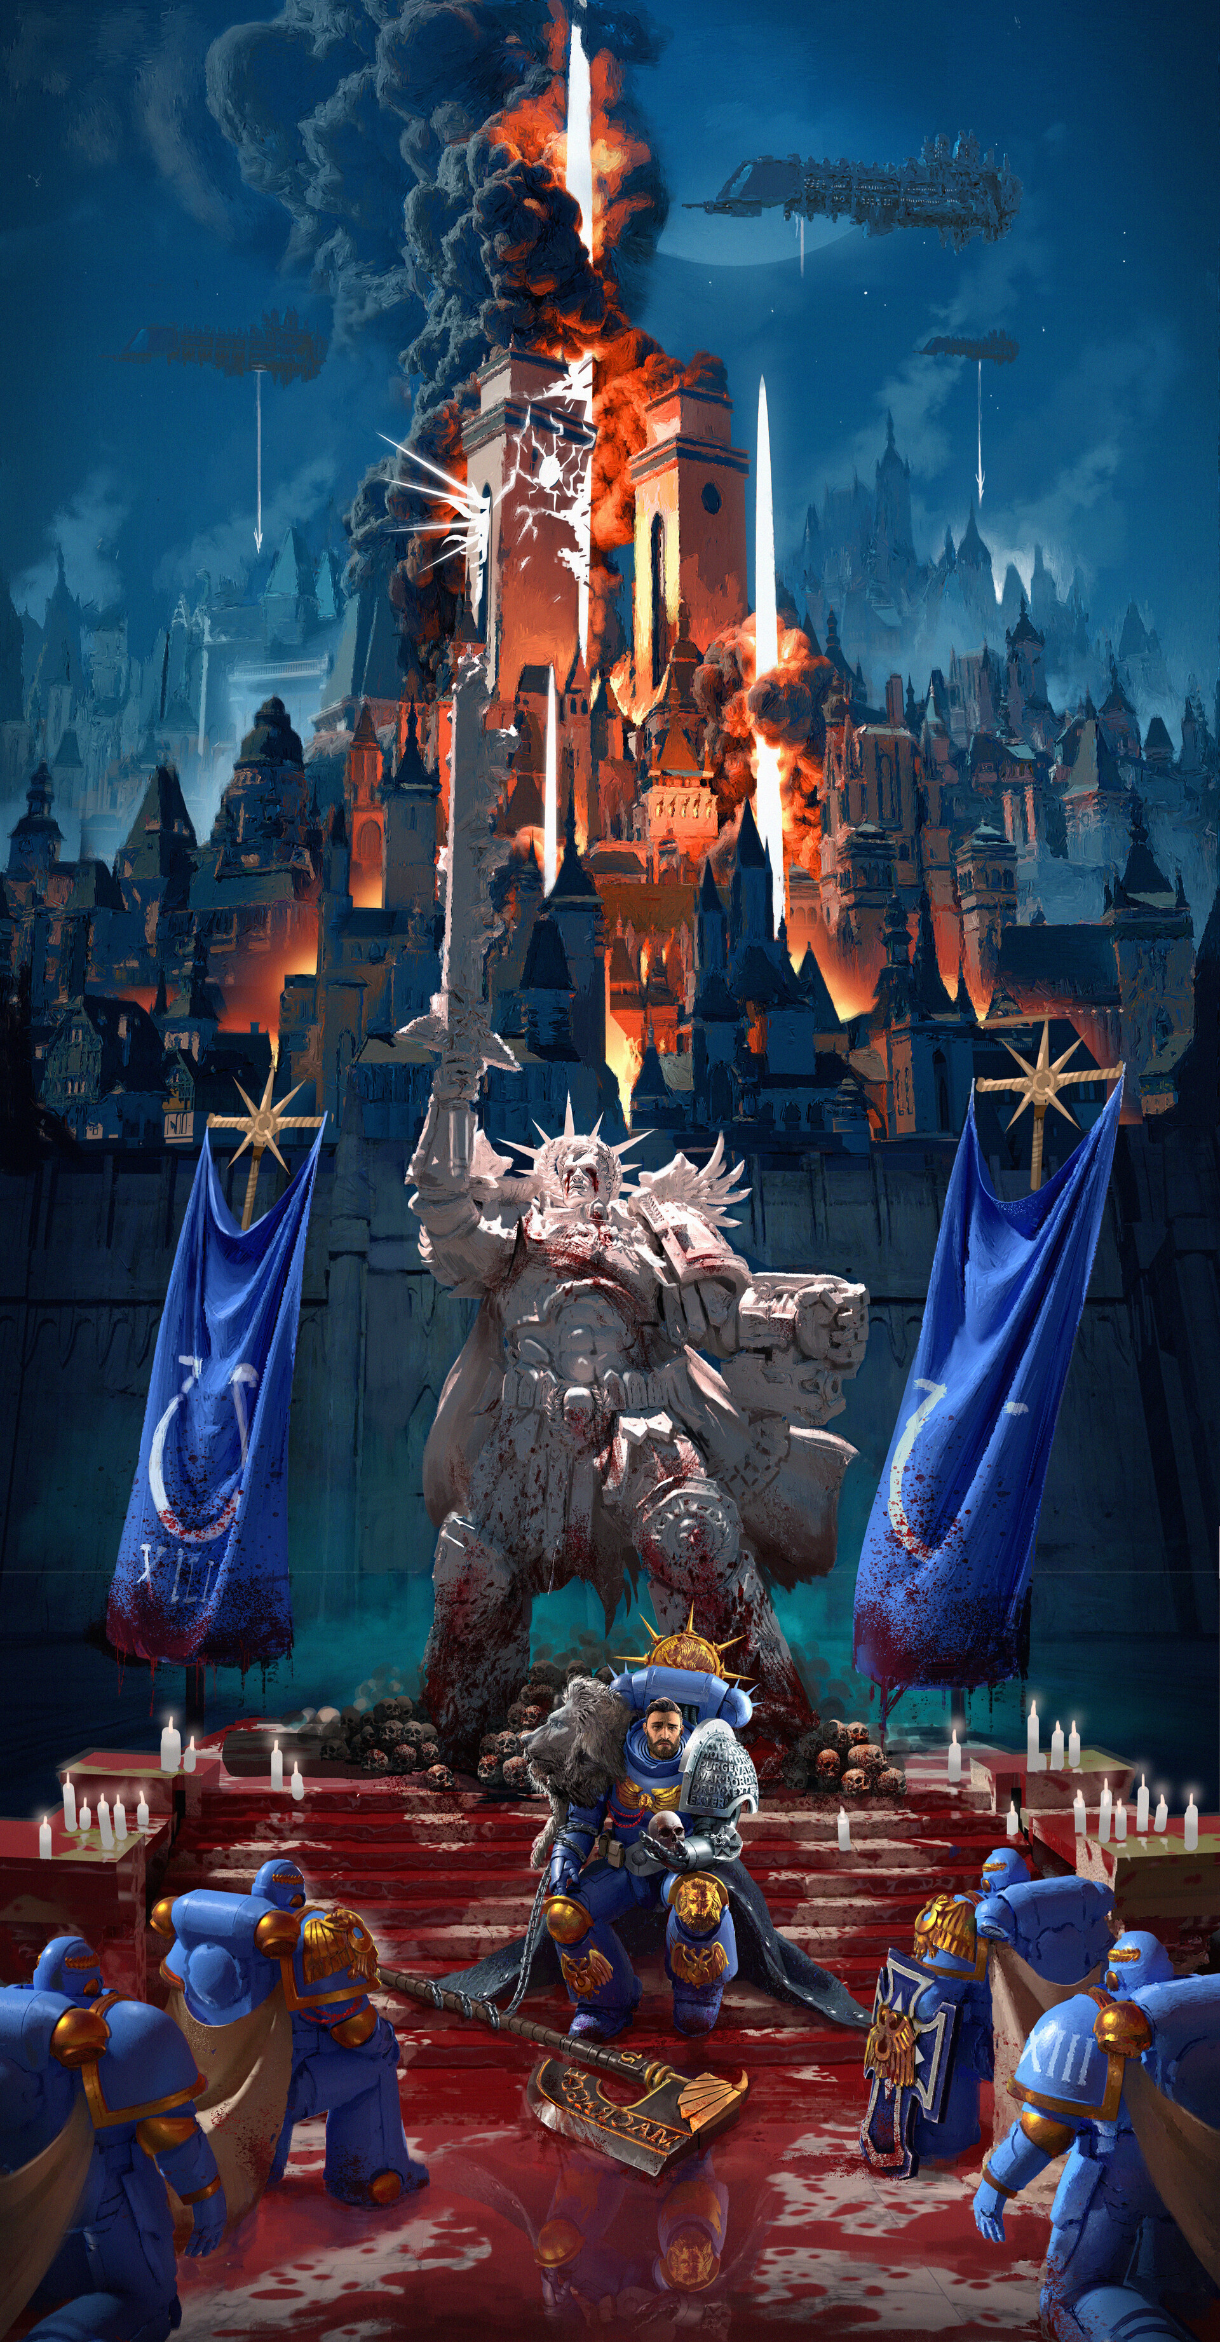 General 1220x2342 Warhammer Warhammer 40,000 blue statue gold white spaceship Imperium of Man Robute Gilliman city wall blood chain axe video games video game art